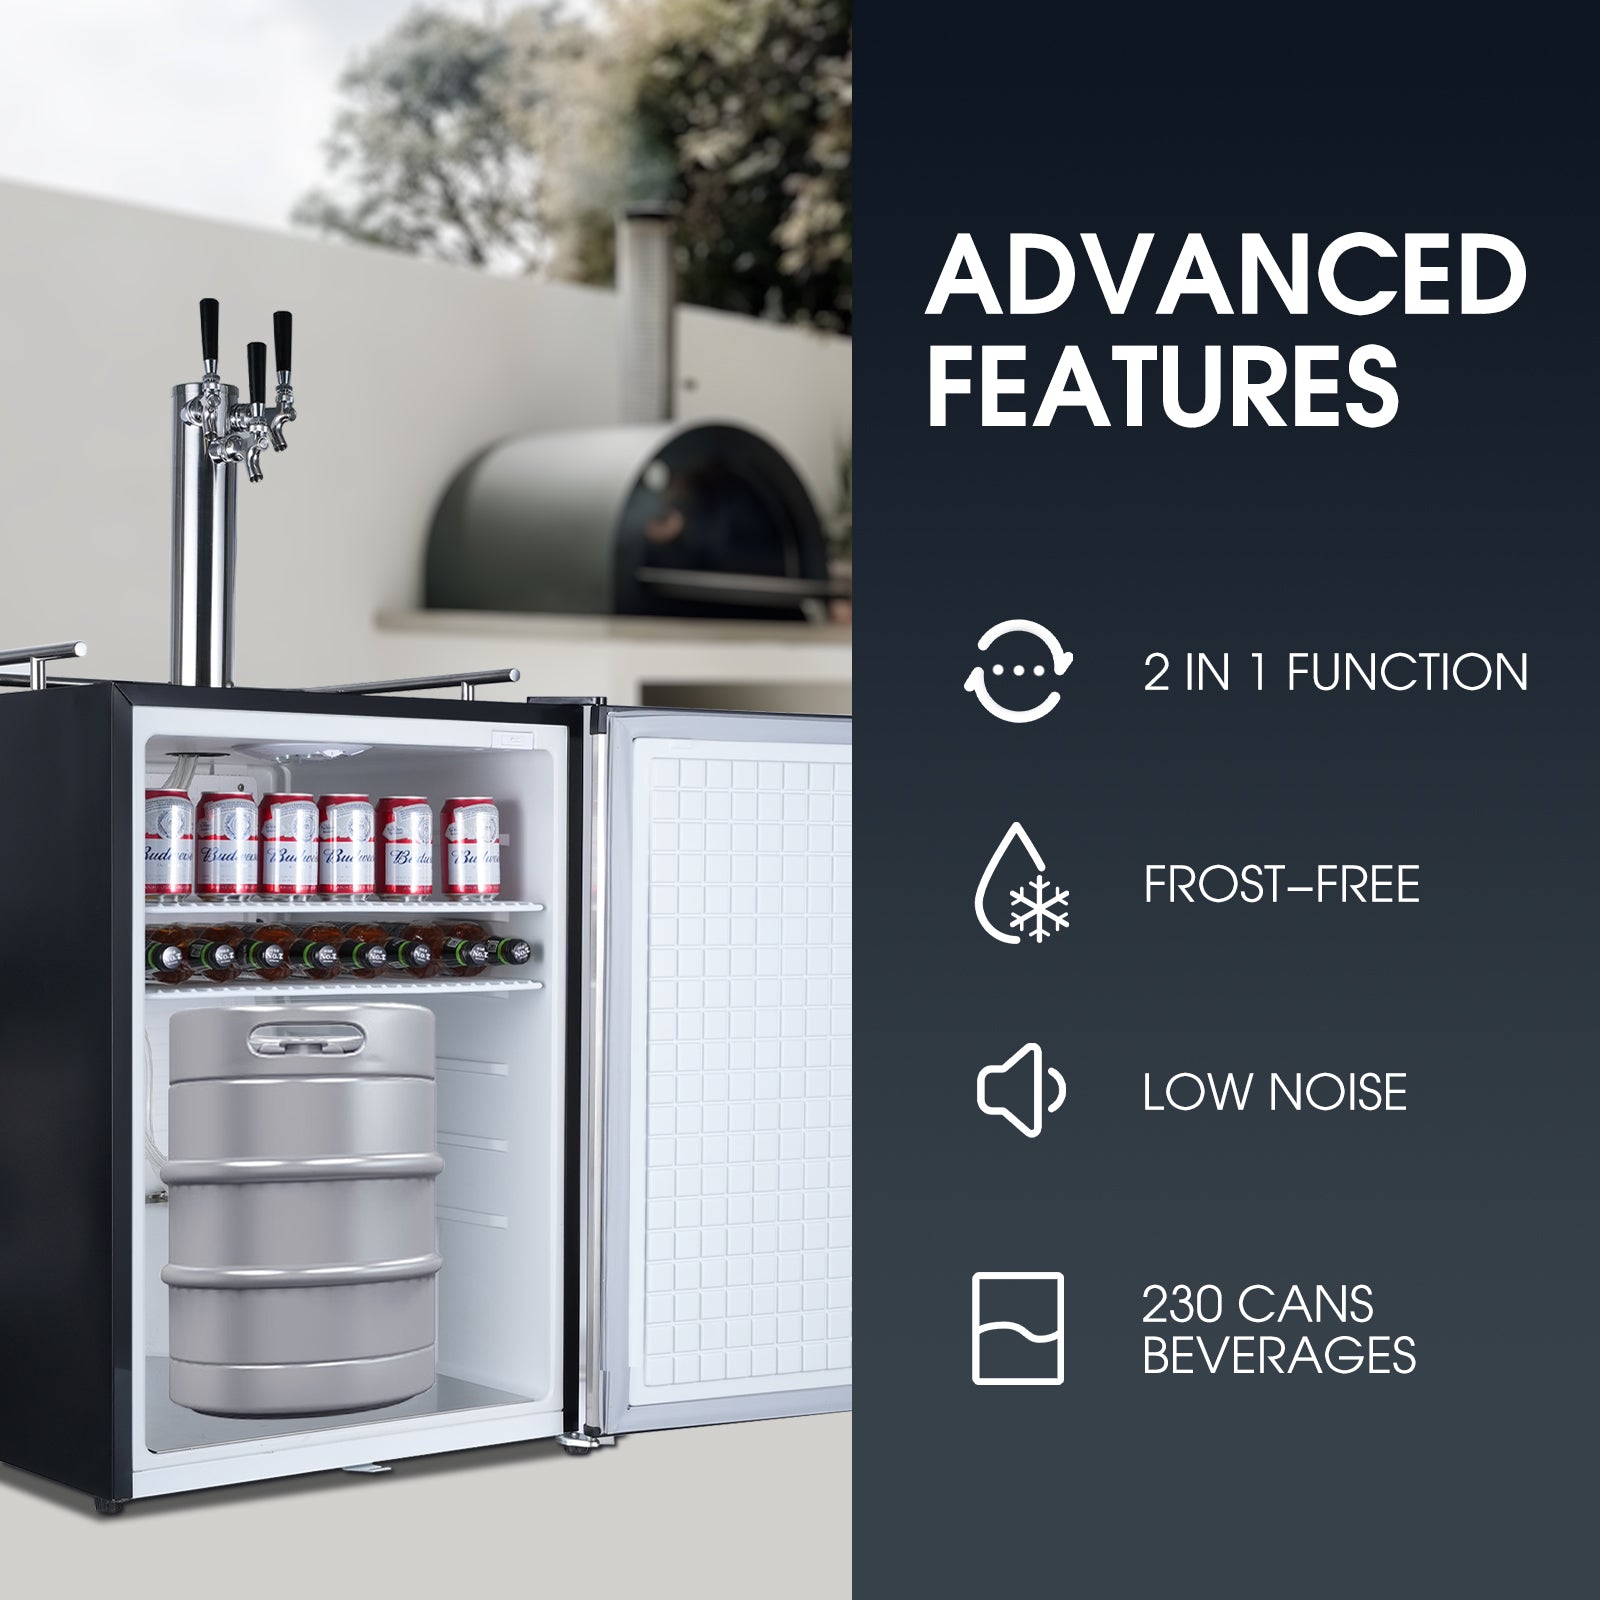 Side view of a 6.53 Cu Ft Outdoor Kegerator Stainless Steel Refrigerator 230 Cans with the door open in a outdoor kitchen setting, accompanied by icons and feature descriptions